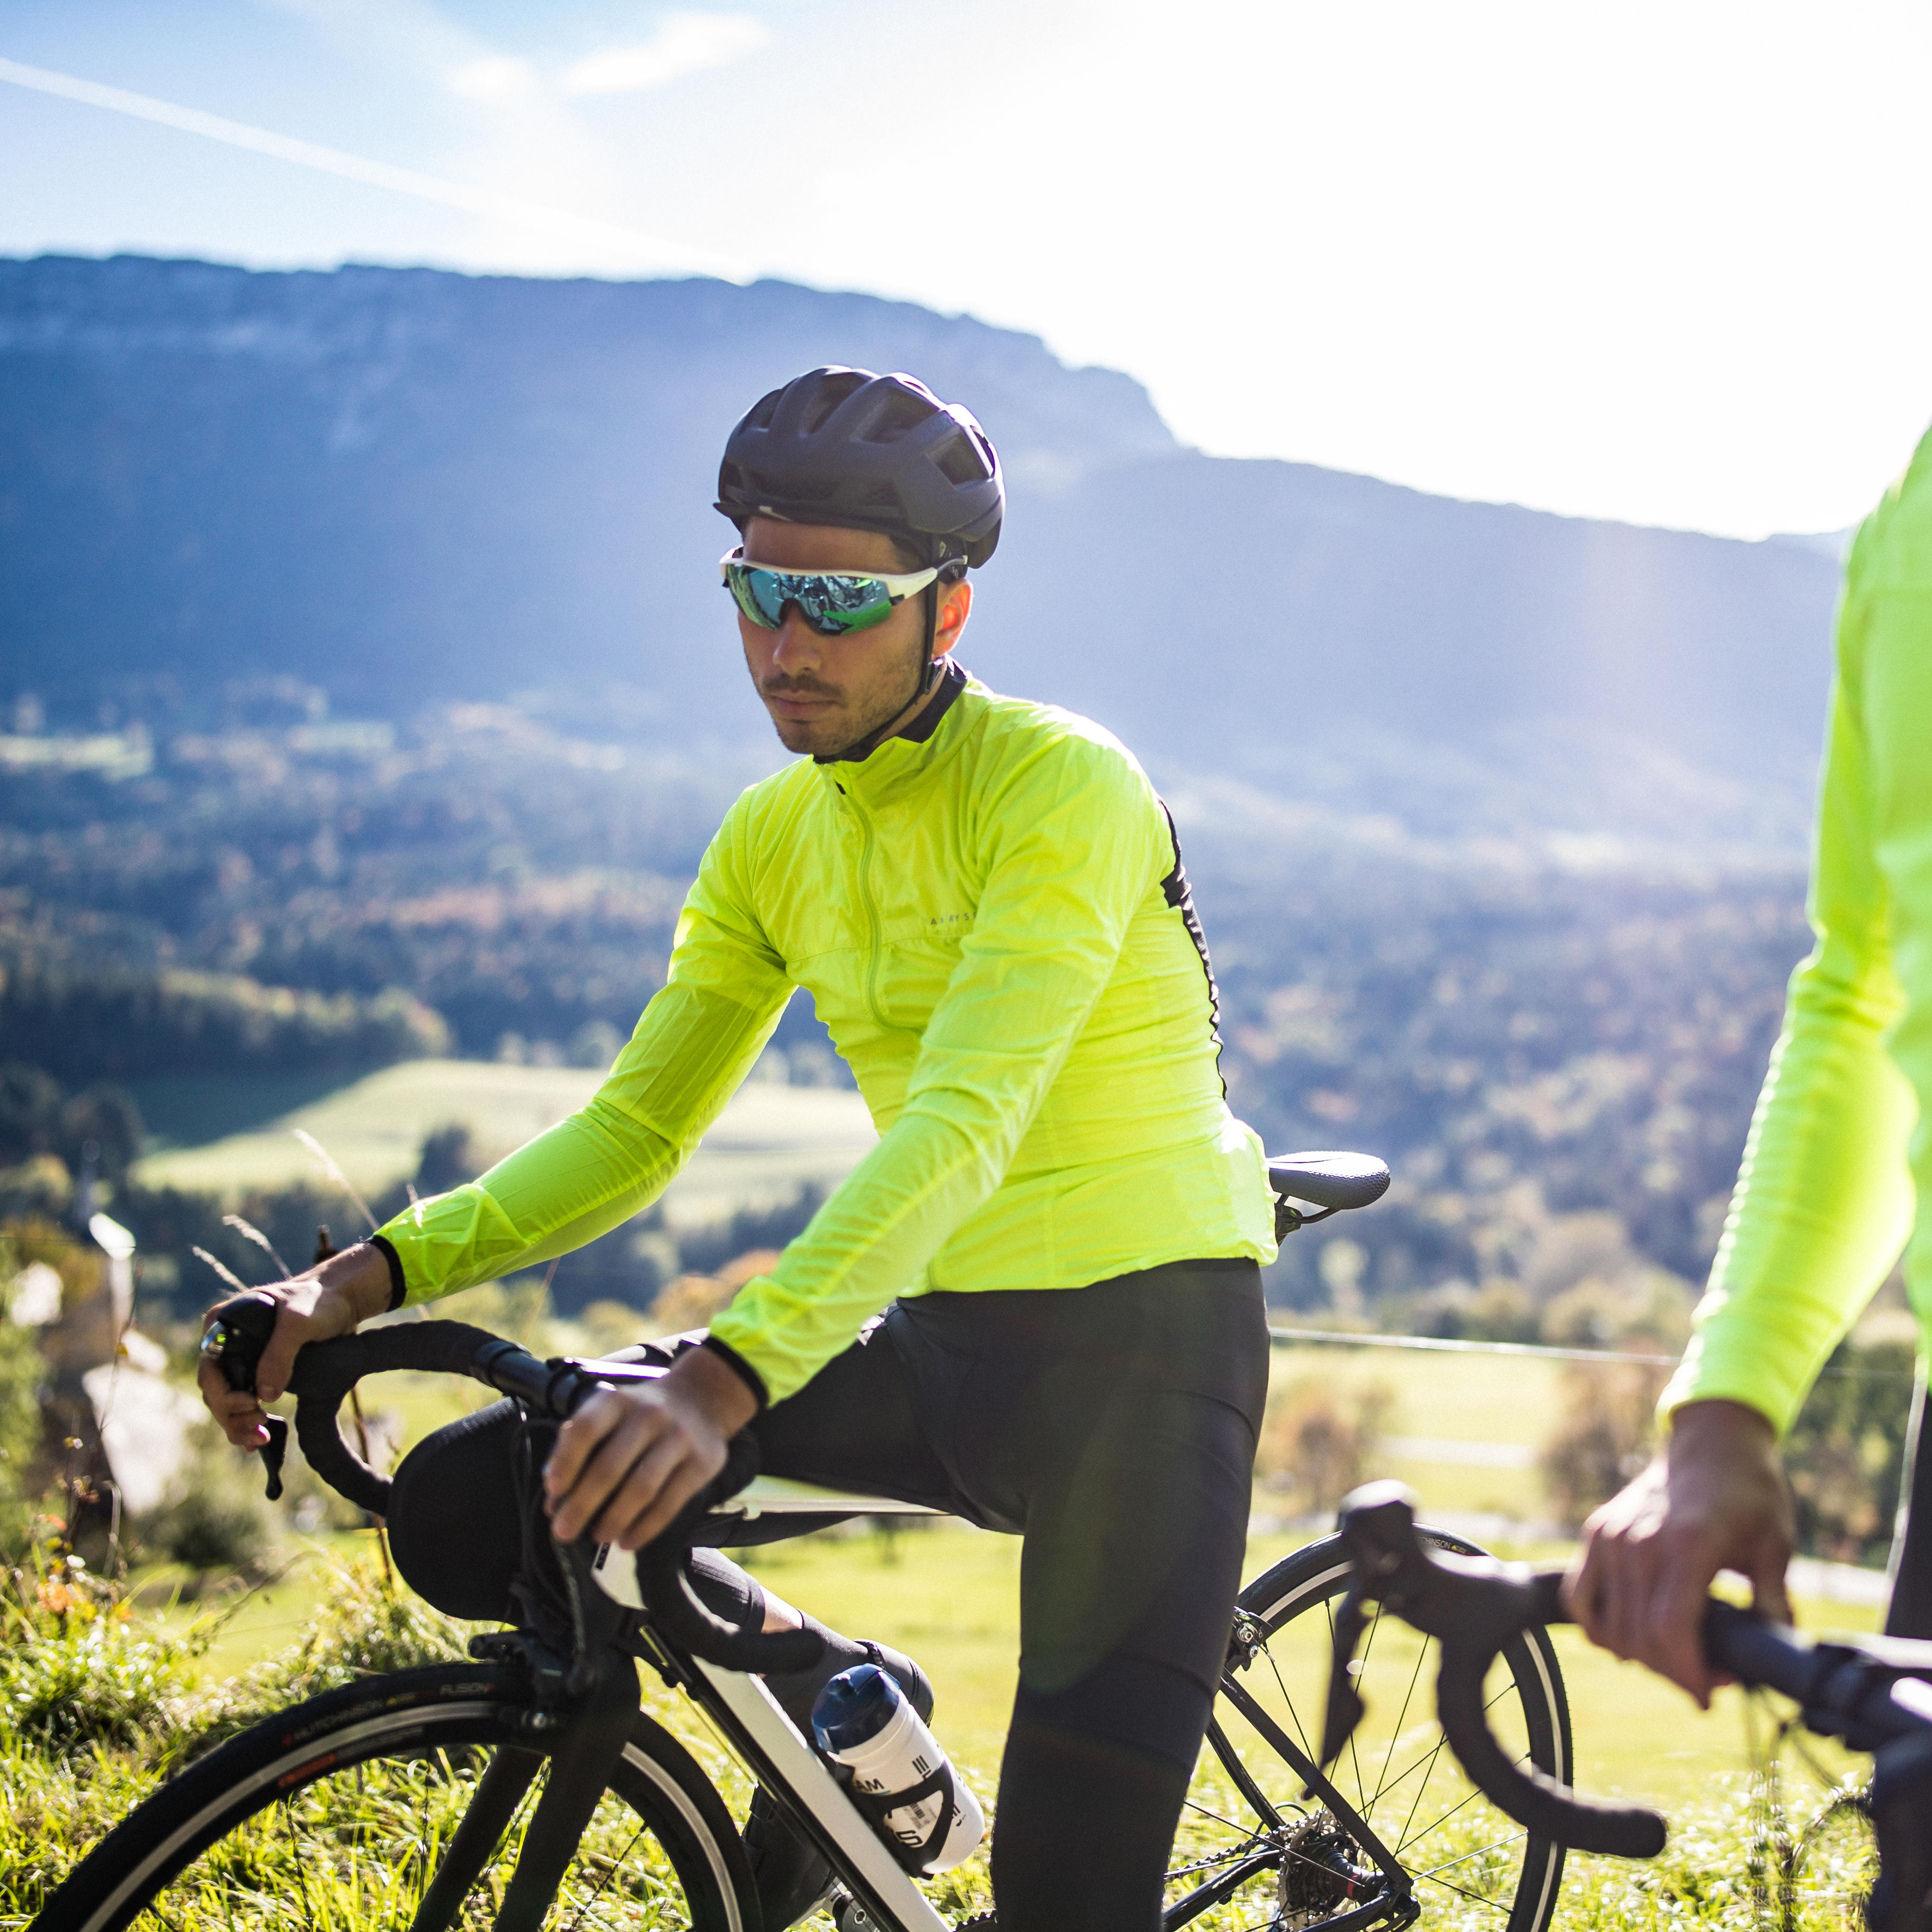 Details about   Mens Fluoro Yellow Jacket Ideal For Cycling Exercise Water Resistant Running 